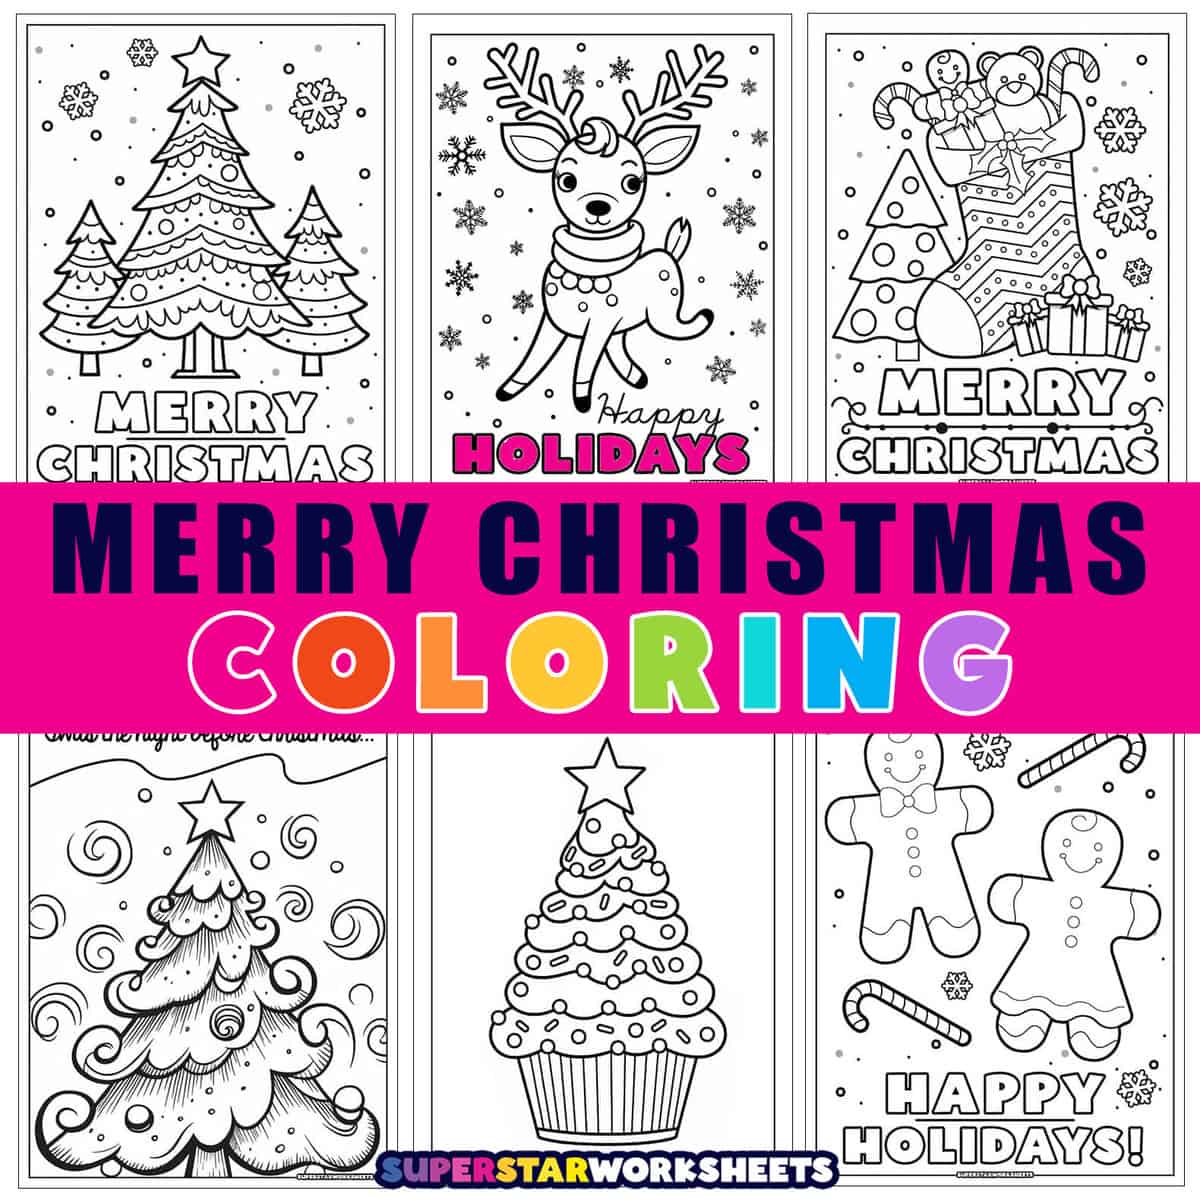 Merry Christmas Coloring Pages - Superstar Worksheets